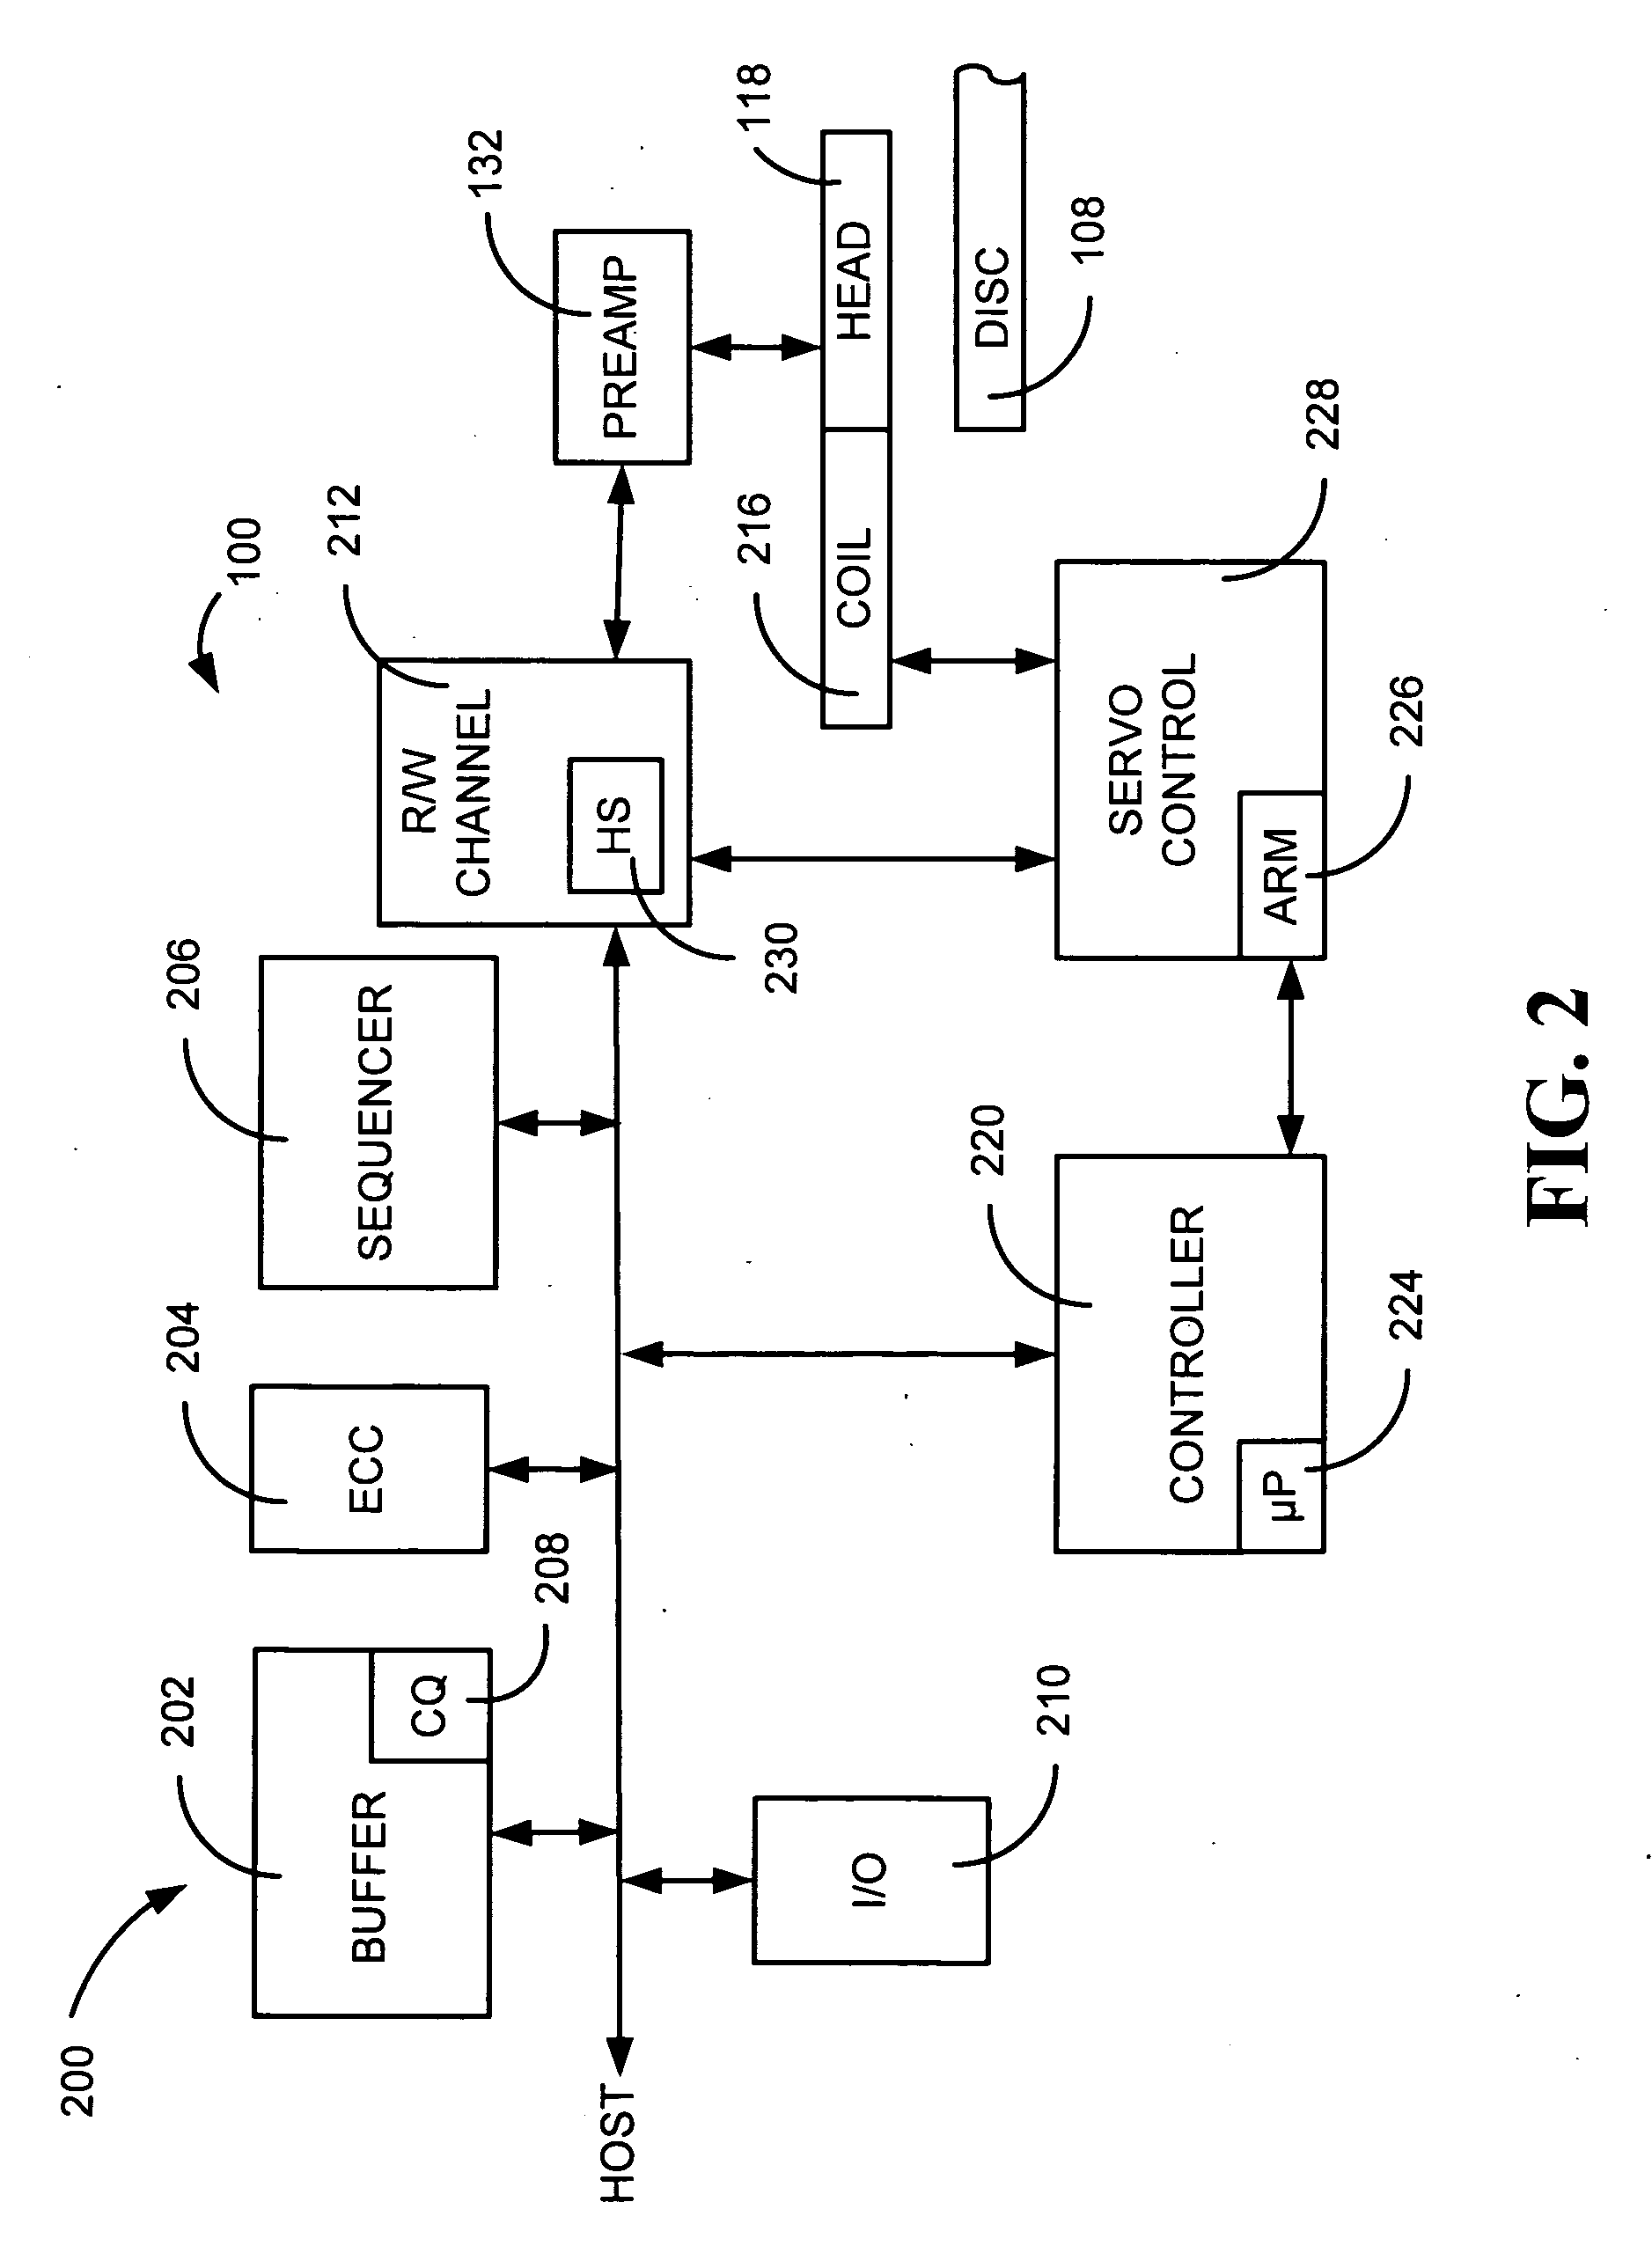 Method and device for compensating for thermal decay in a magnetic storage device